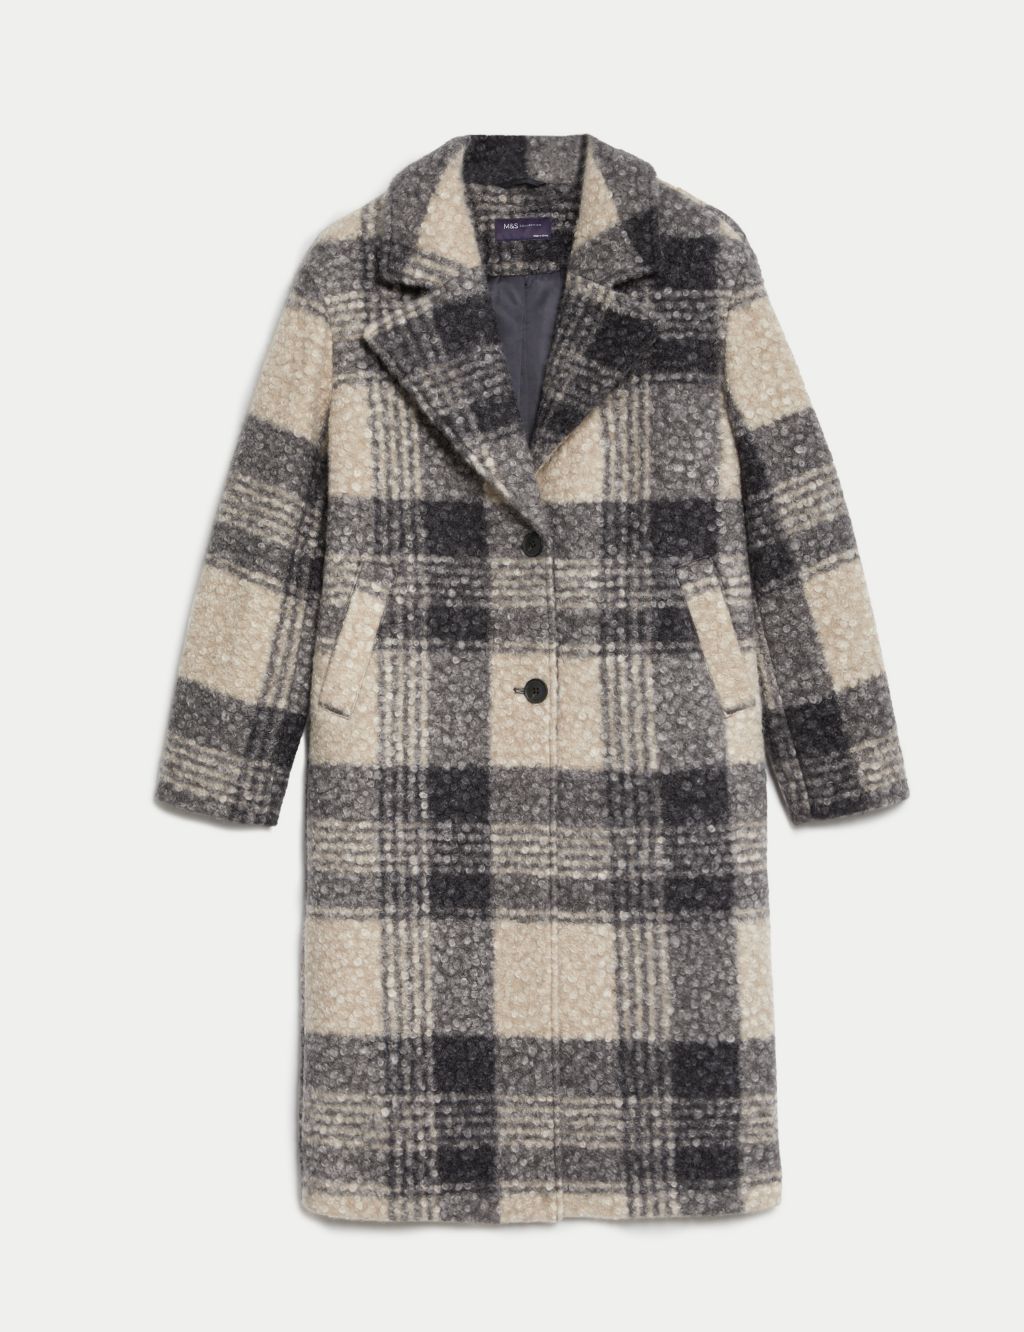 Checked Textured Single Breasted Coat image 2